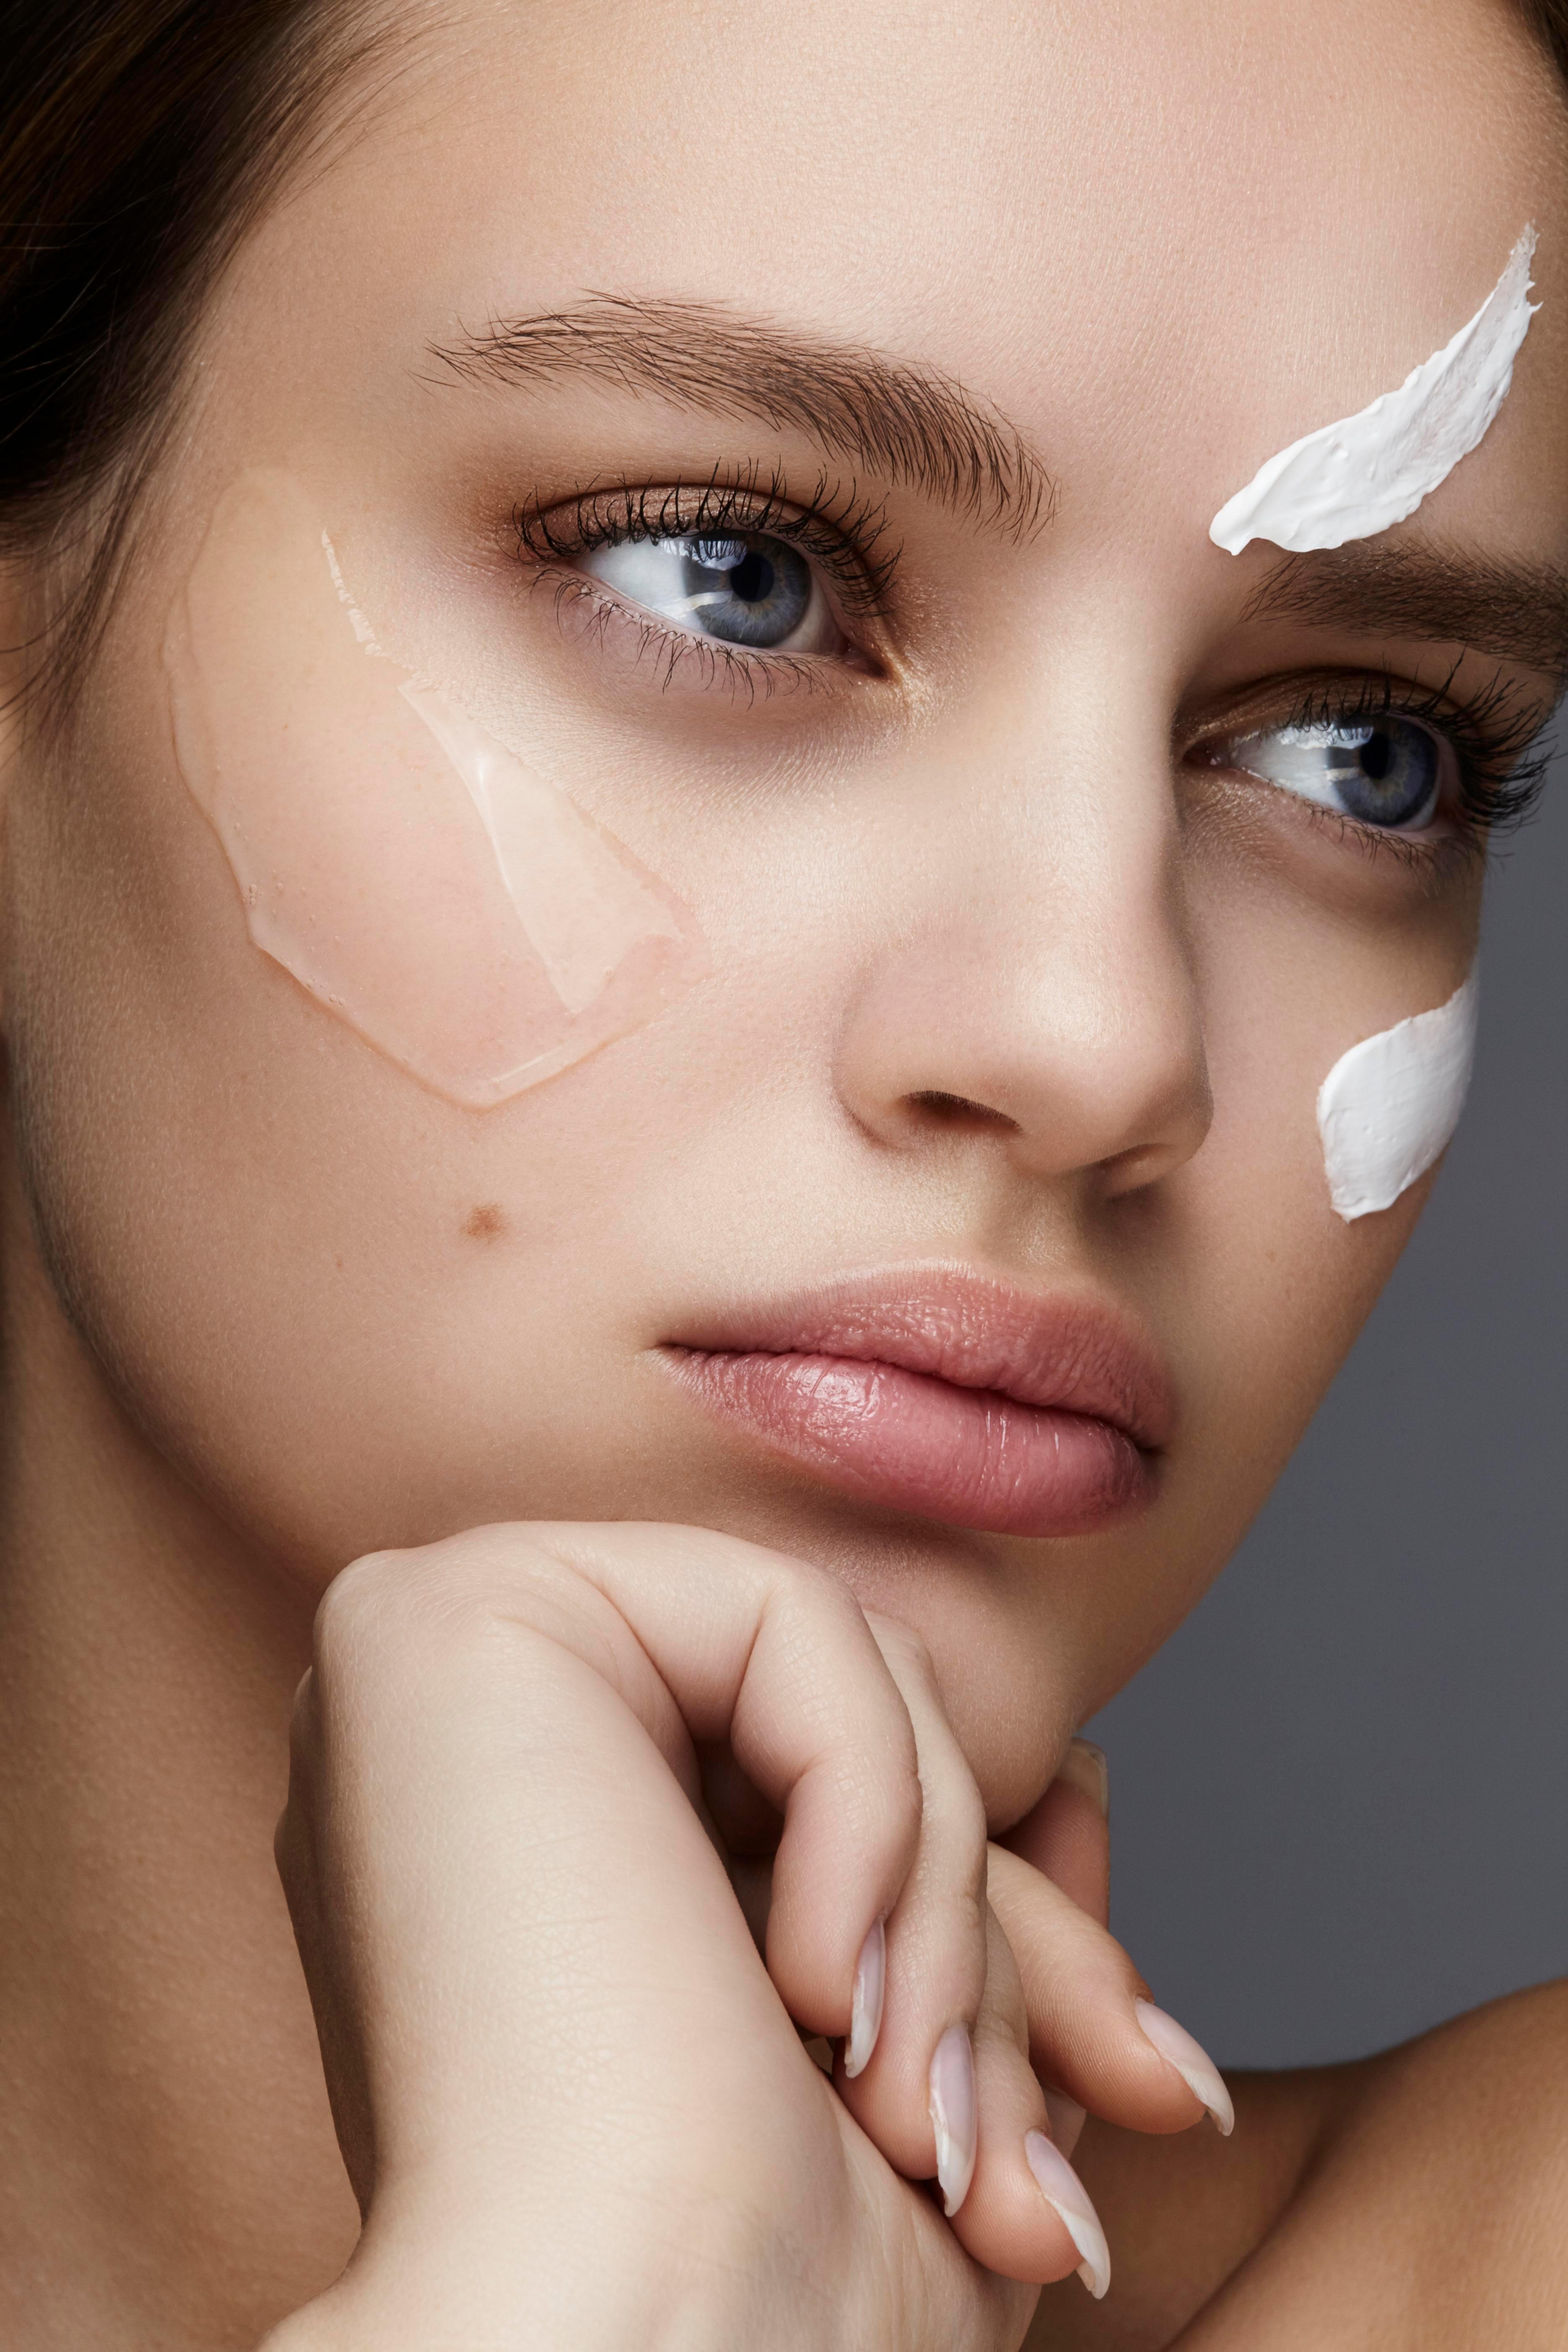  It’s important to approach retinol products with caution, claim experts